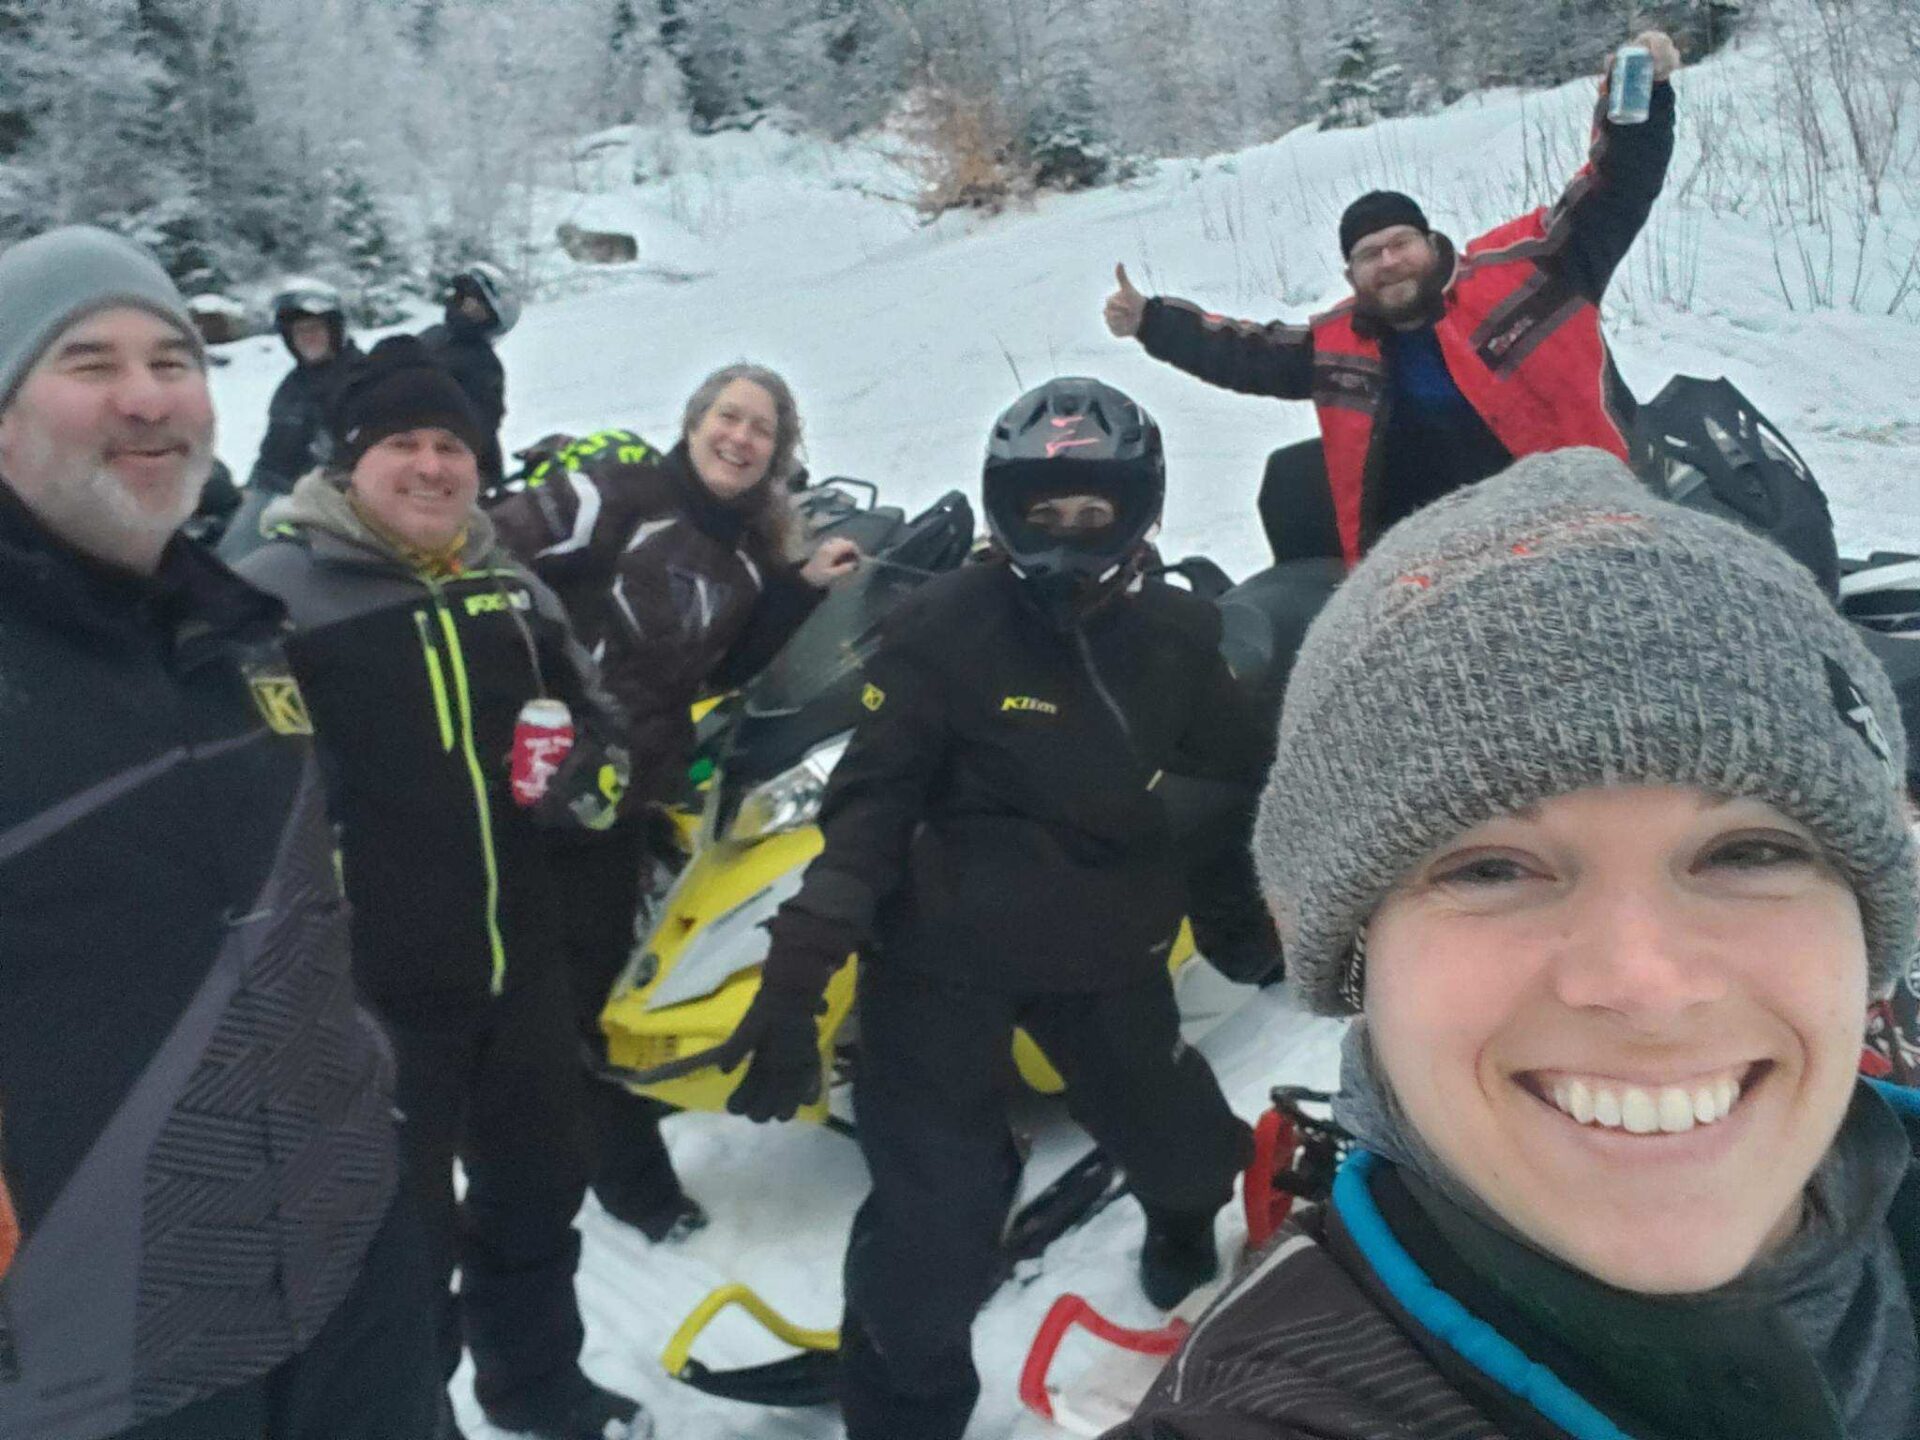 A group of six people posing with snowmobiles in a snowy landscape, smiling and raising their hands in celebration.